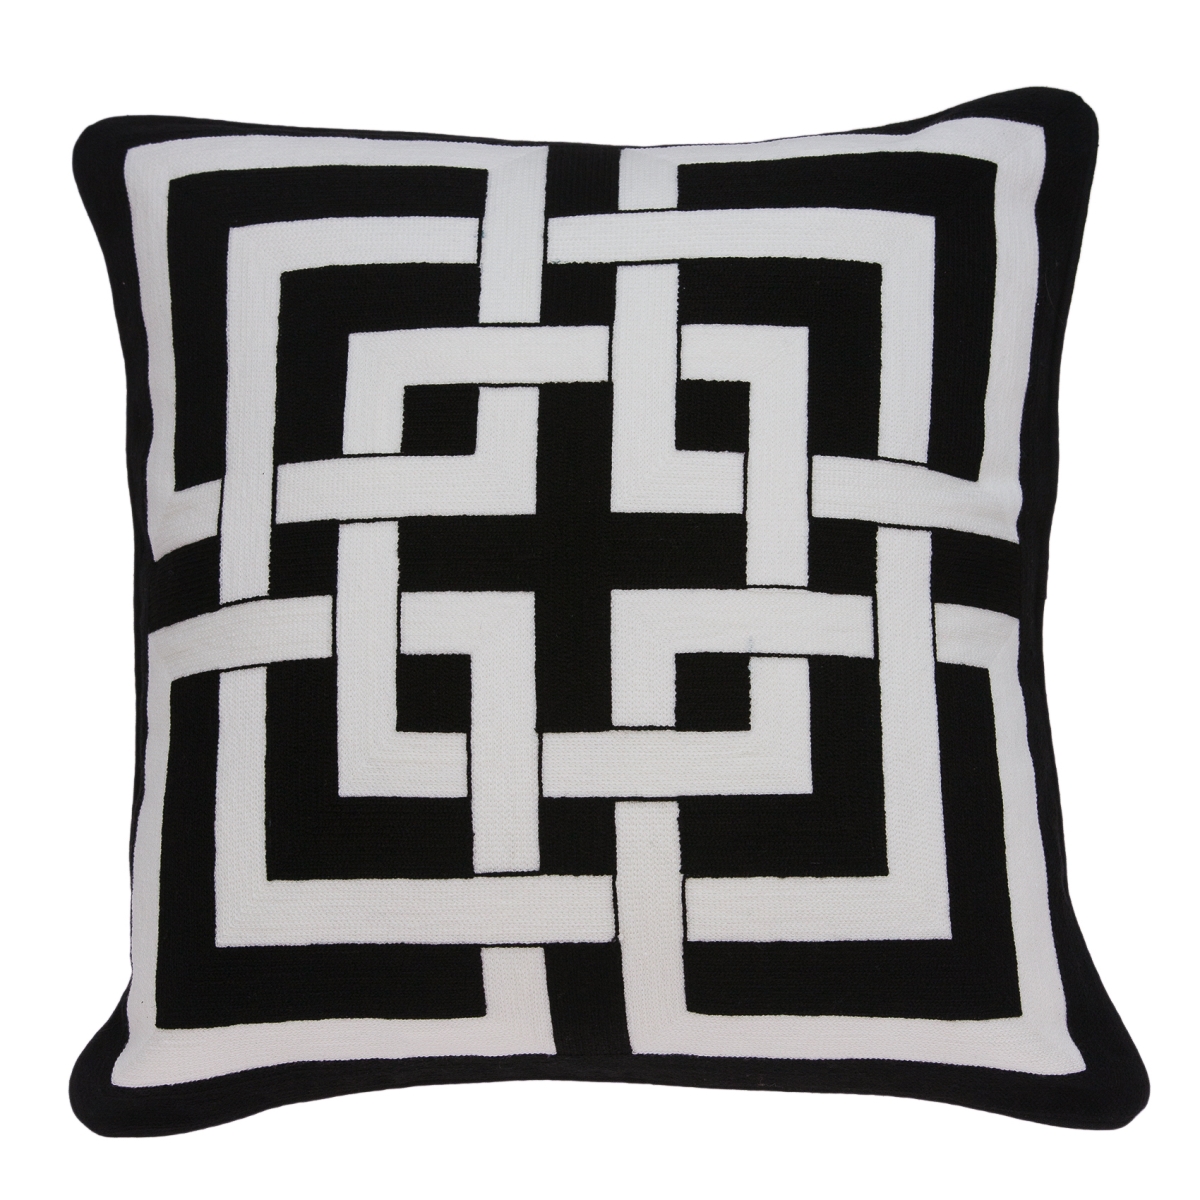 Pila11001p Abali Black & White Square Transitional Pillow Cover With Poly Insert - 20 X 20 X 7 In.